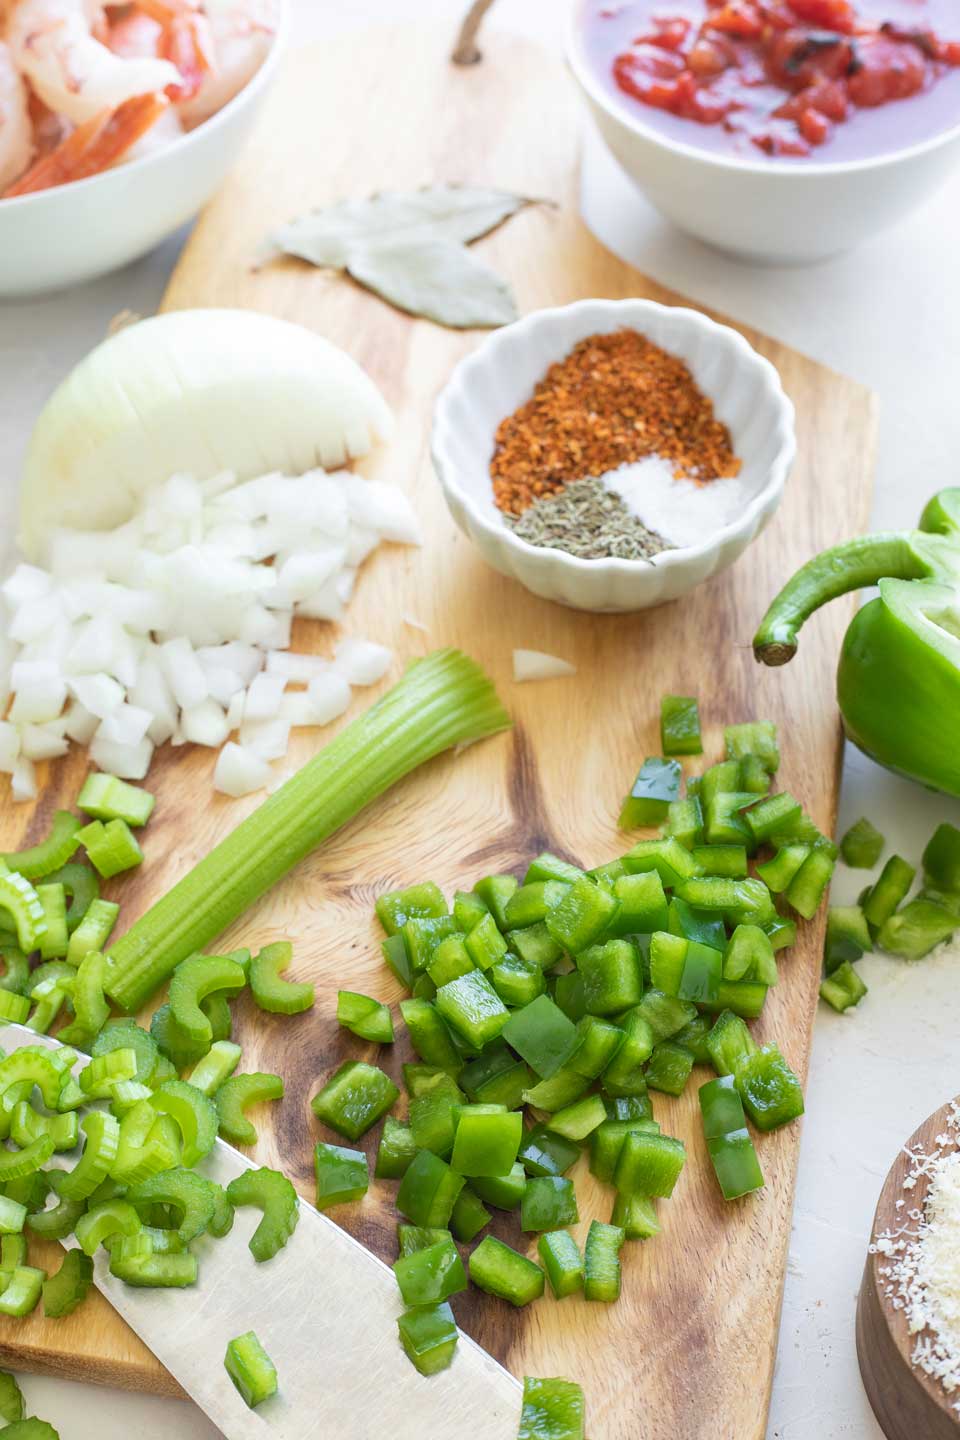 Chopped green peppers, celery and onion on cutting board, surrounded by other ingredients.